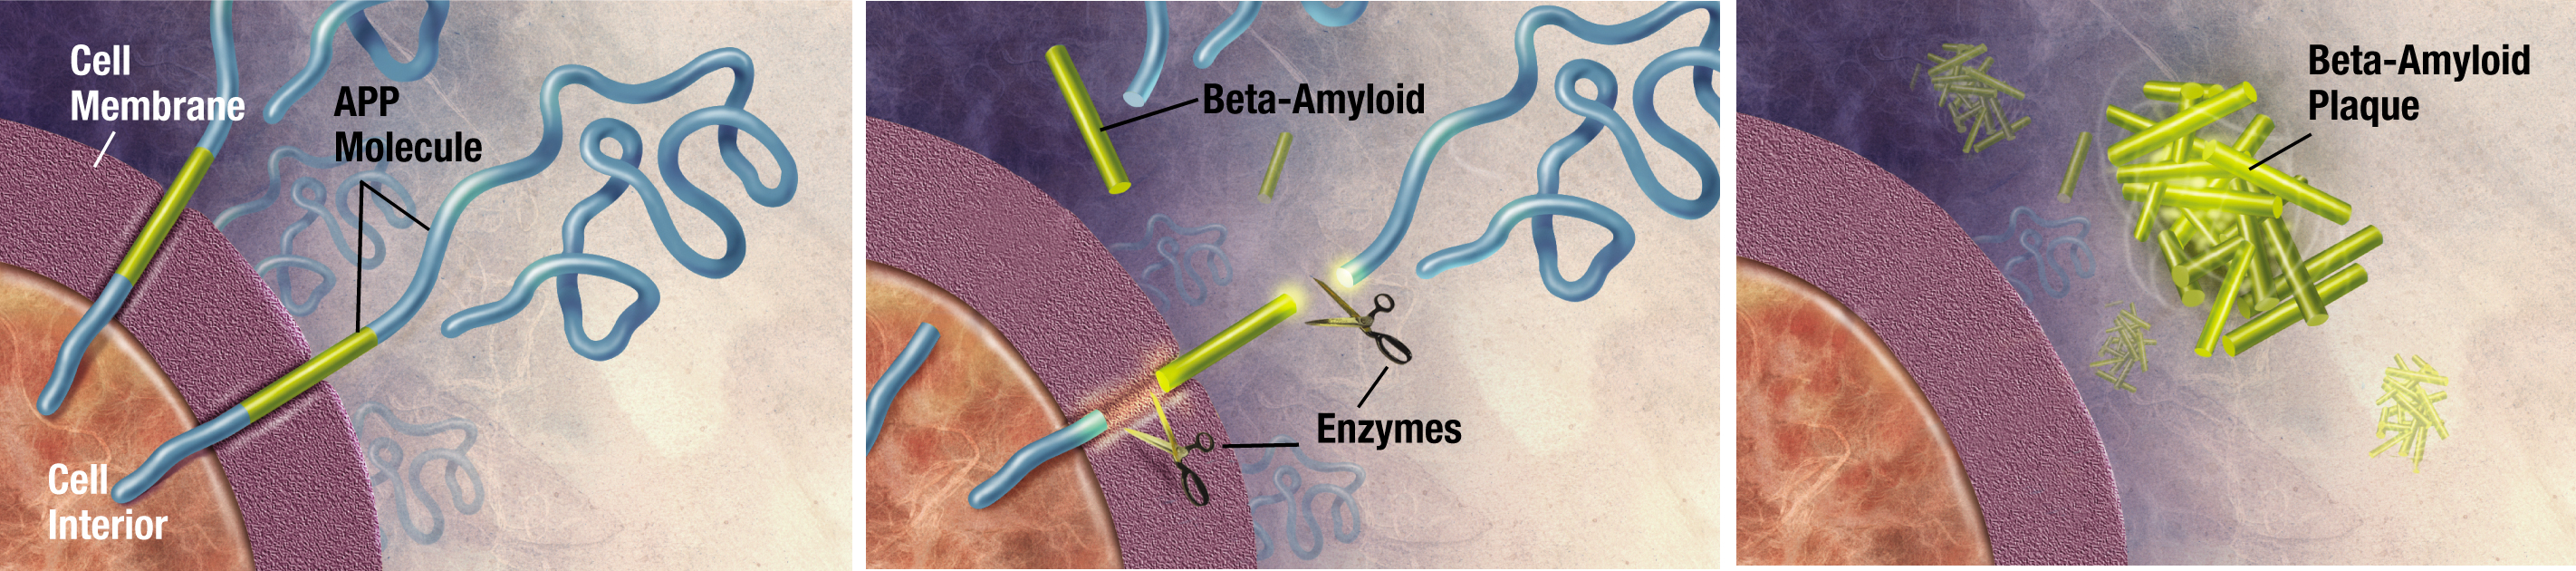 Amyloid Plaque Formation Mechanism